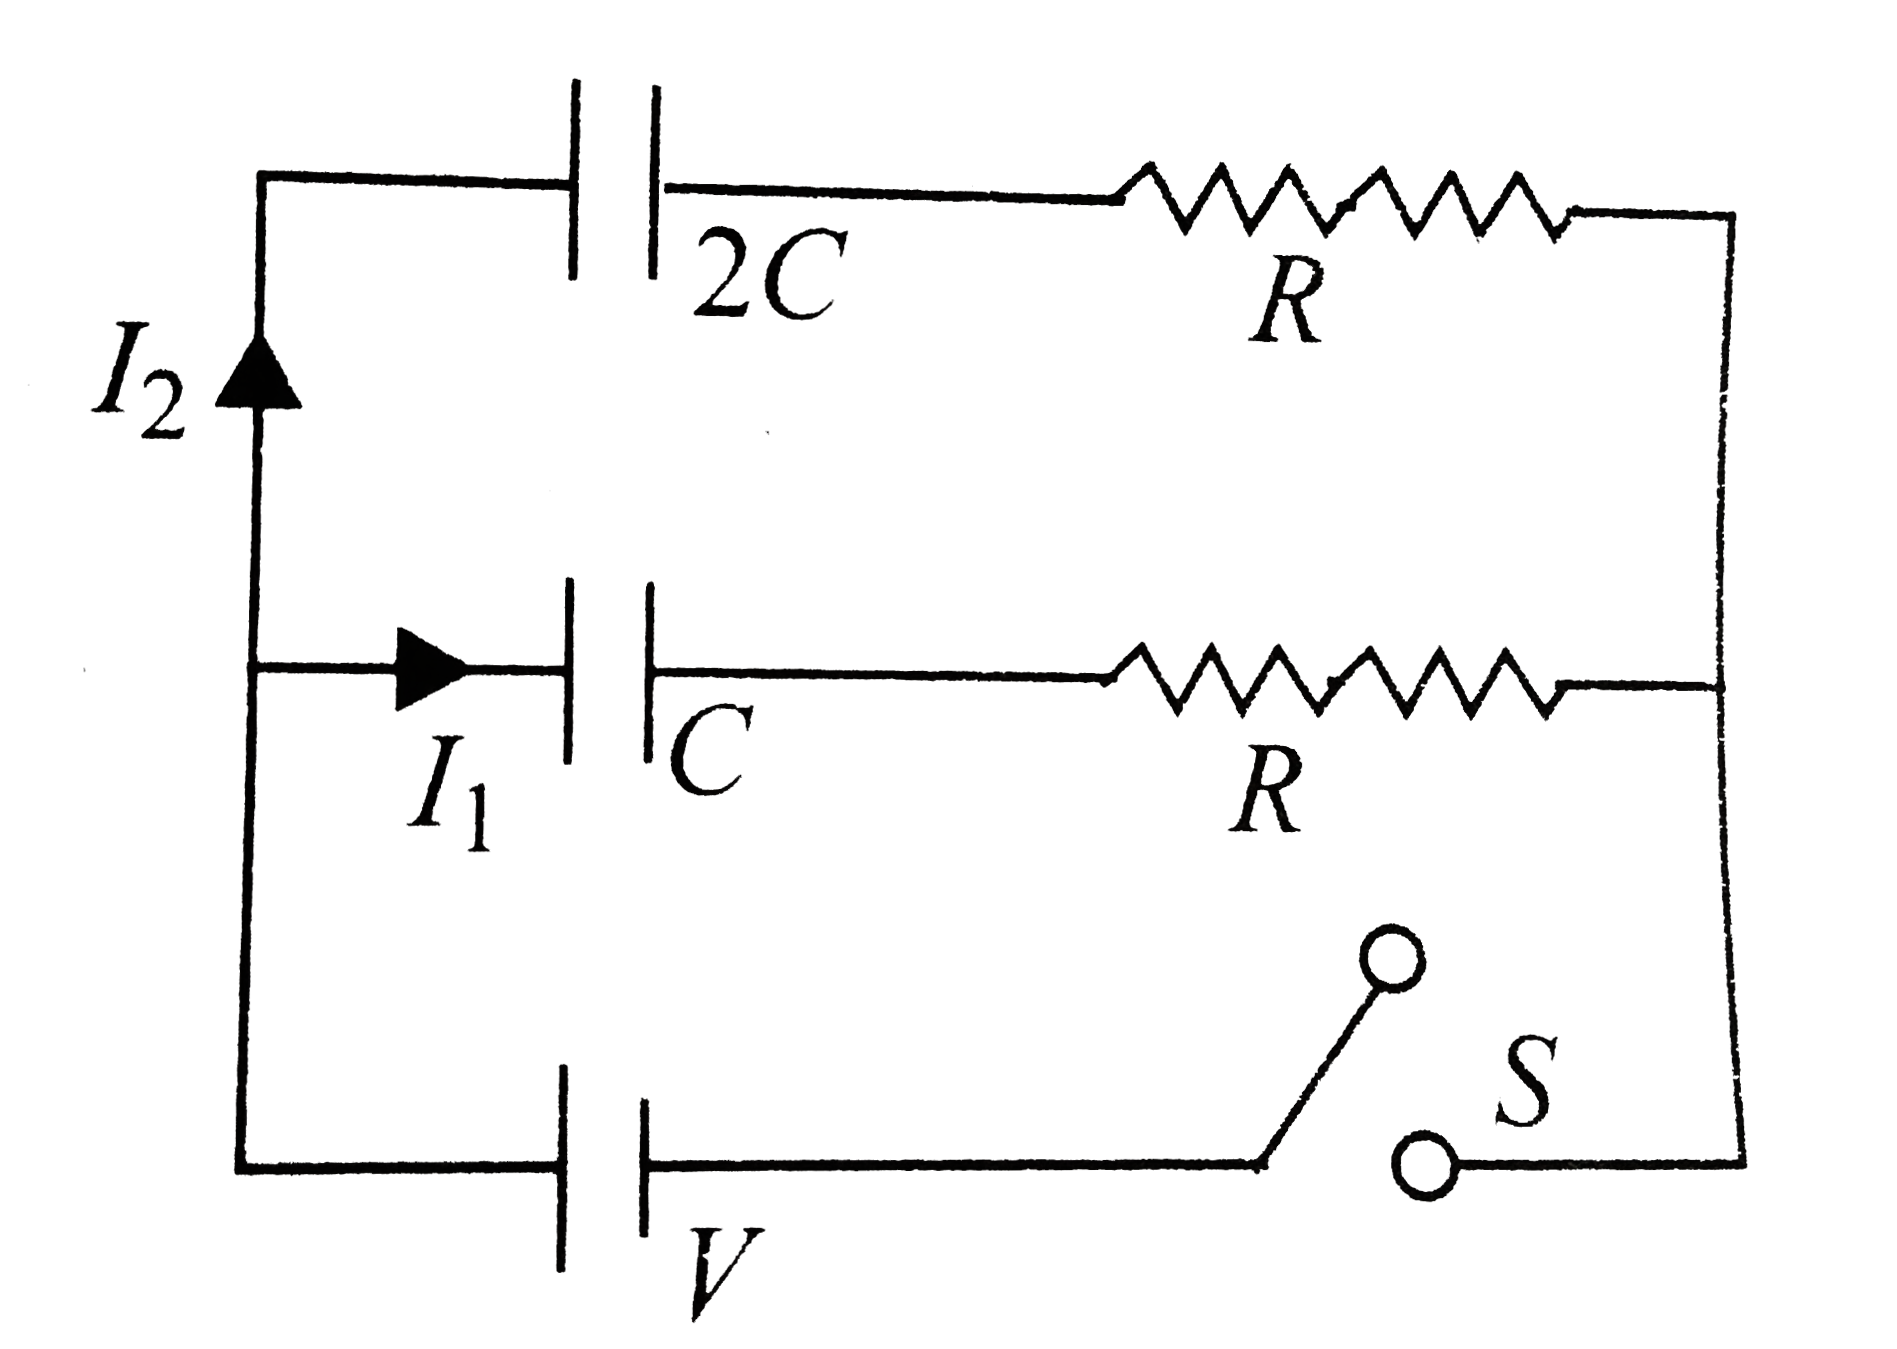 In the circuit shwon in fig. switch S is closed at time t = 0. Let I1 and I2 be the currents at any finite time t, then the ratio I1// I2